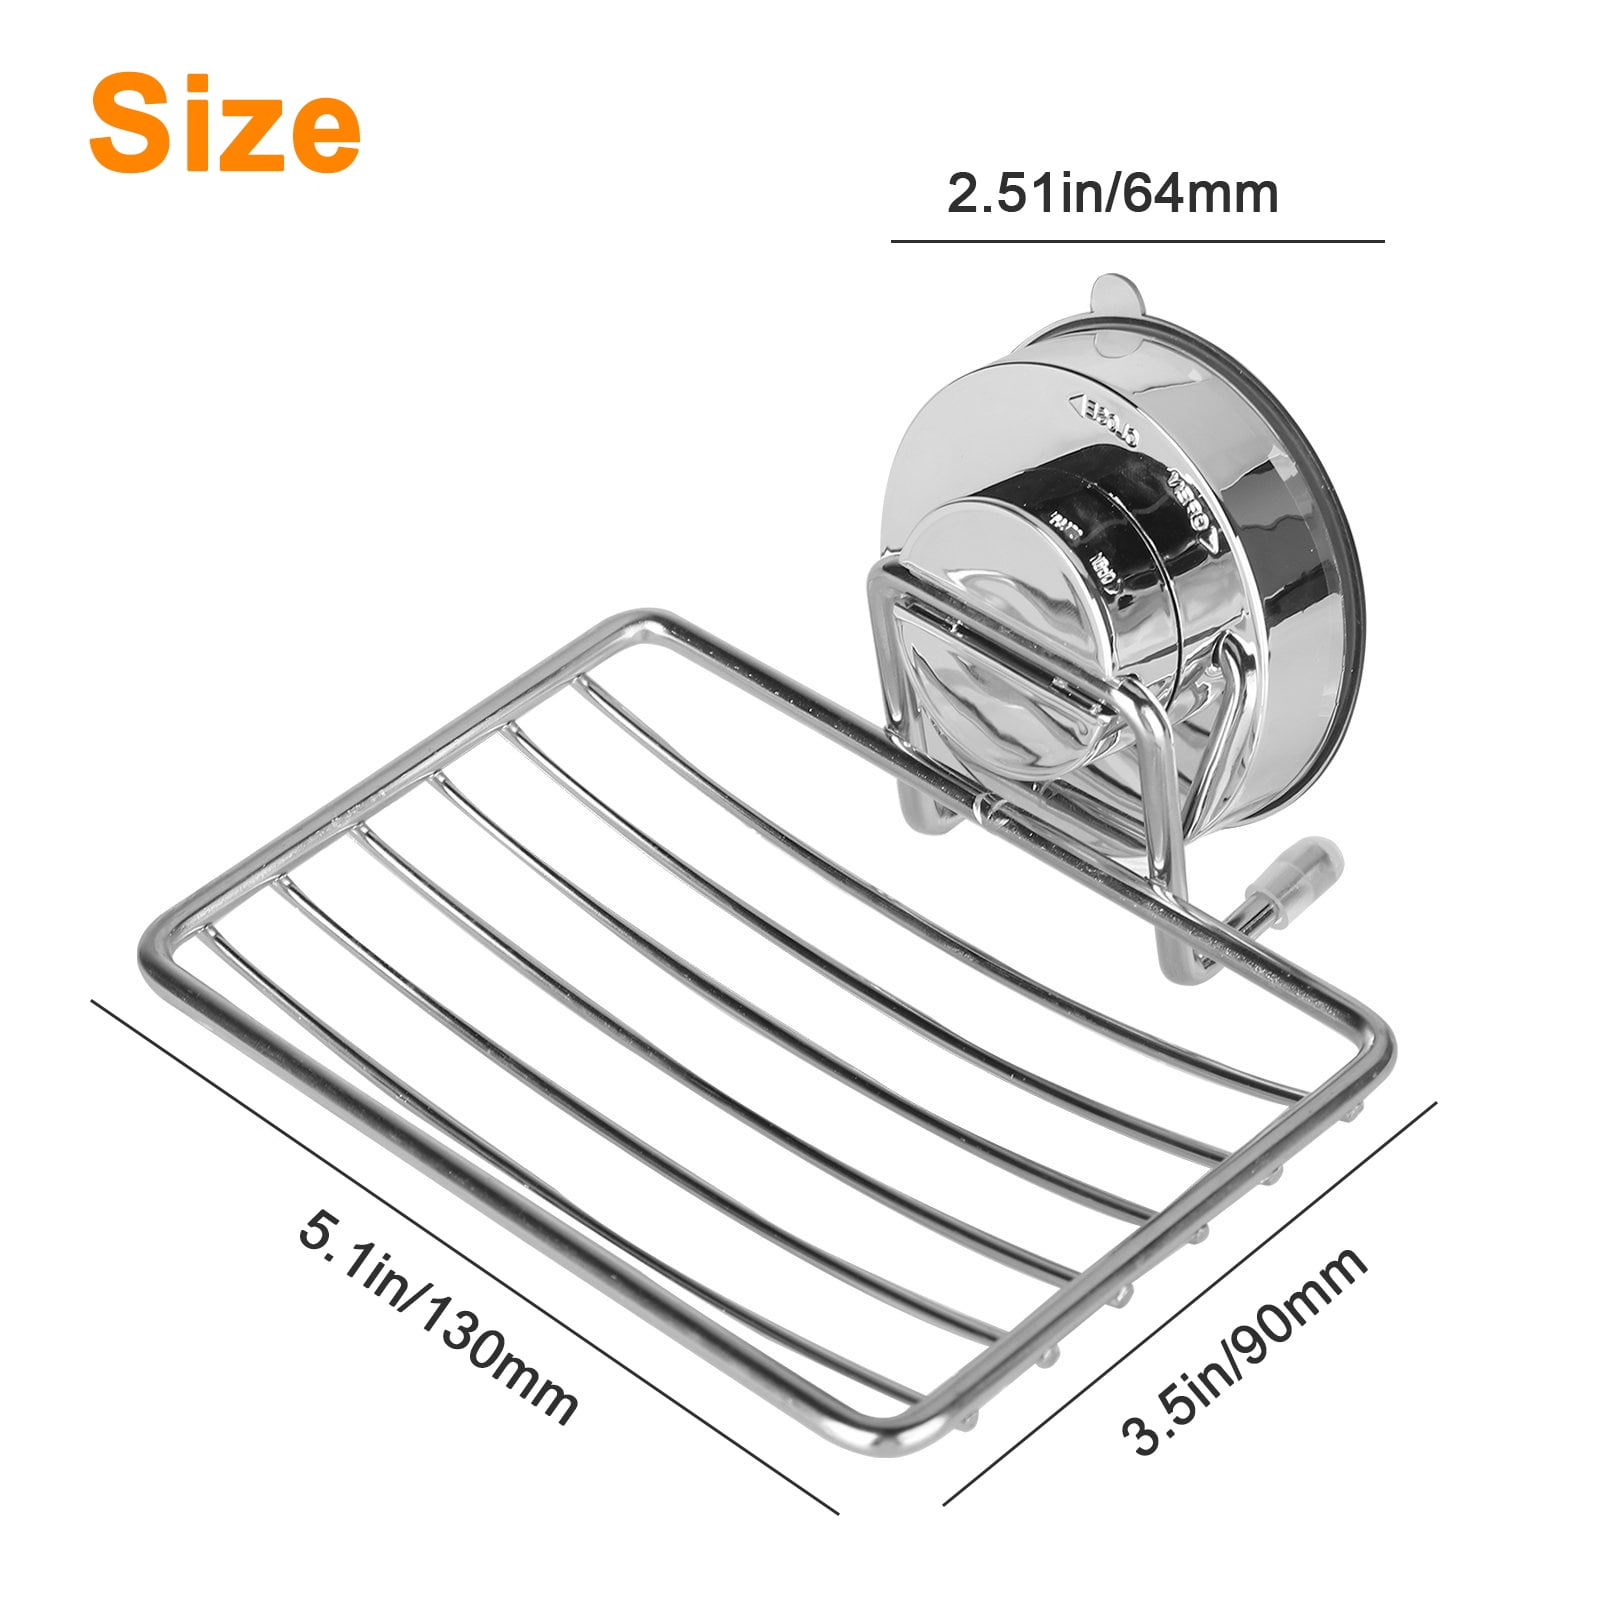 Stainless Steel Indoor Home Bathroom Soap Dish Sponge Holder Suction Cup Mount 